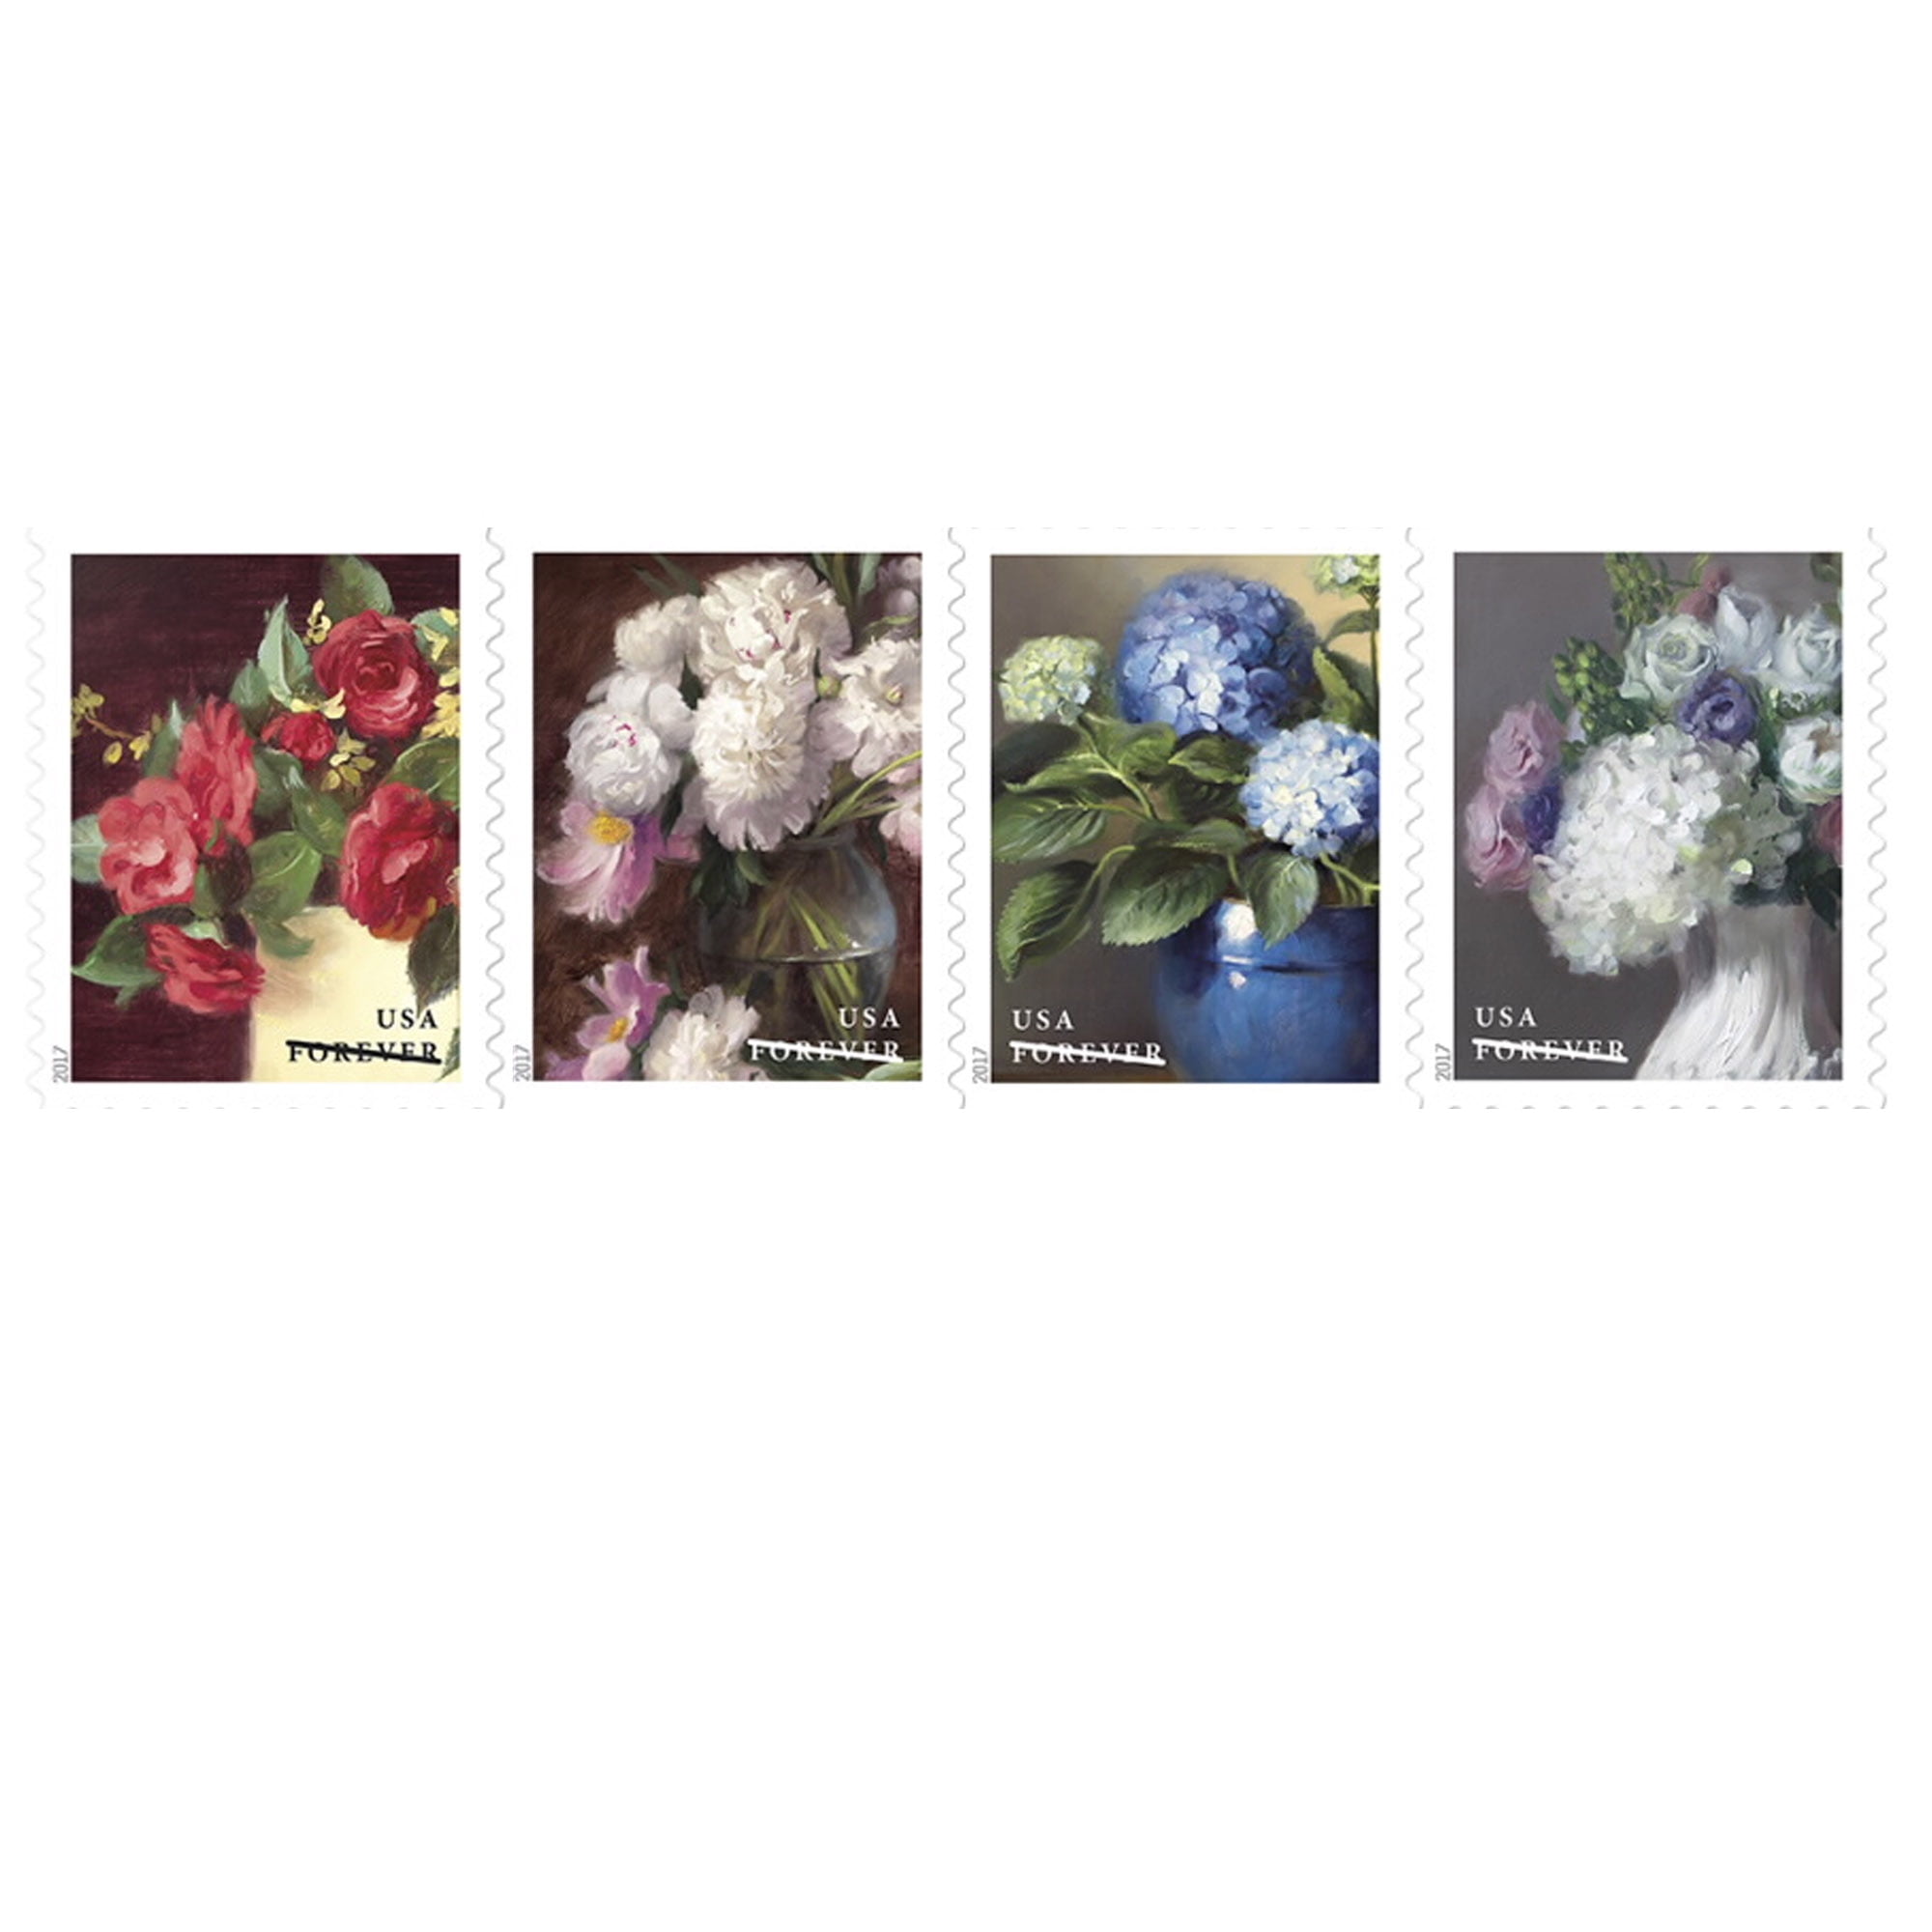 Flowers from the Garden Strip of 20 USPS Forever First Class Postage Stamps Celebrate Wedding Beauty (20 Stamps)